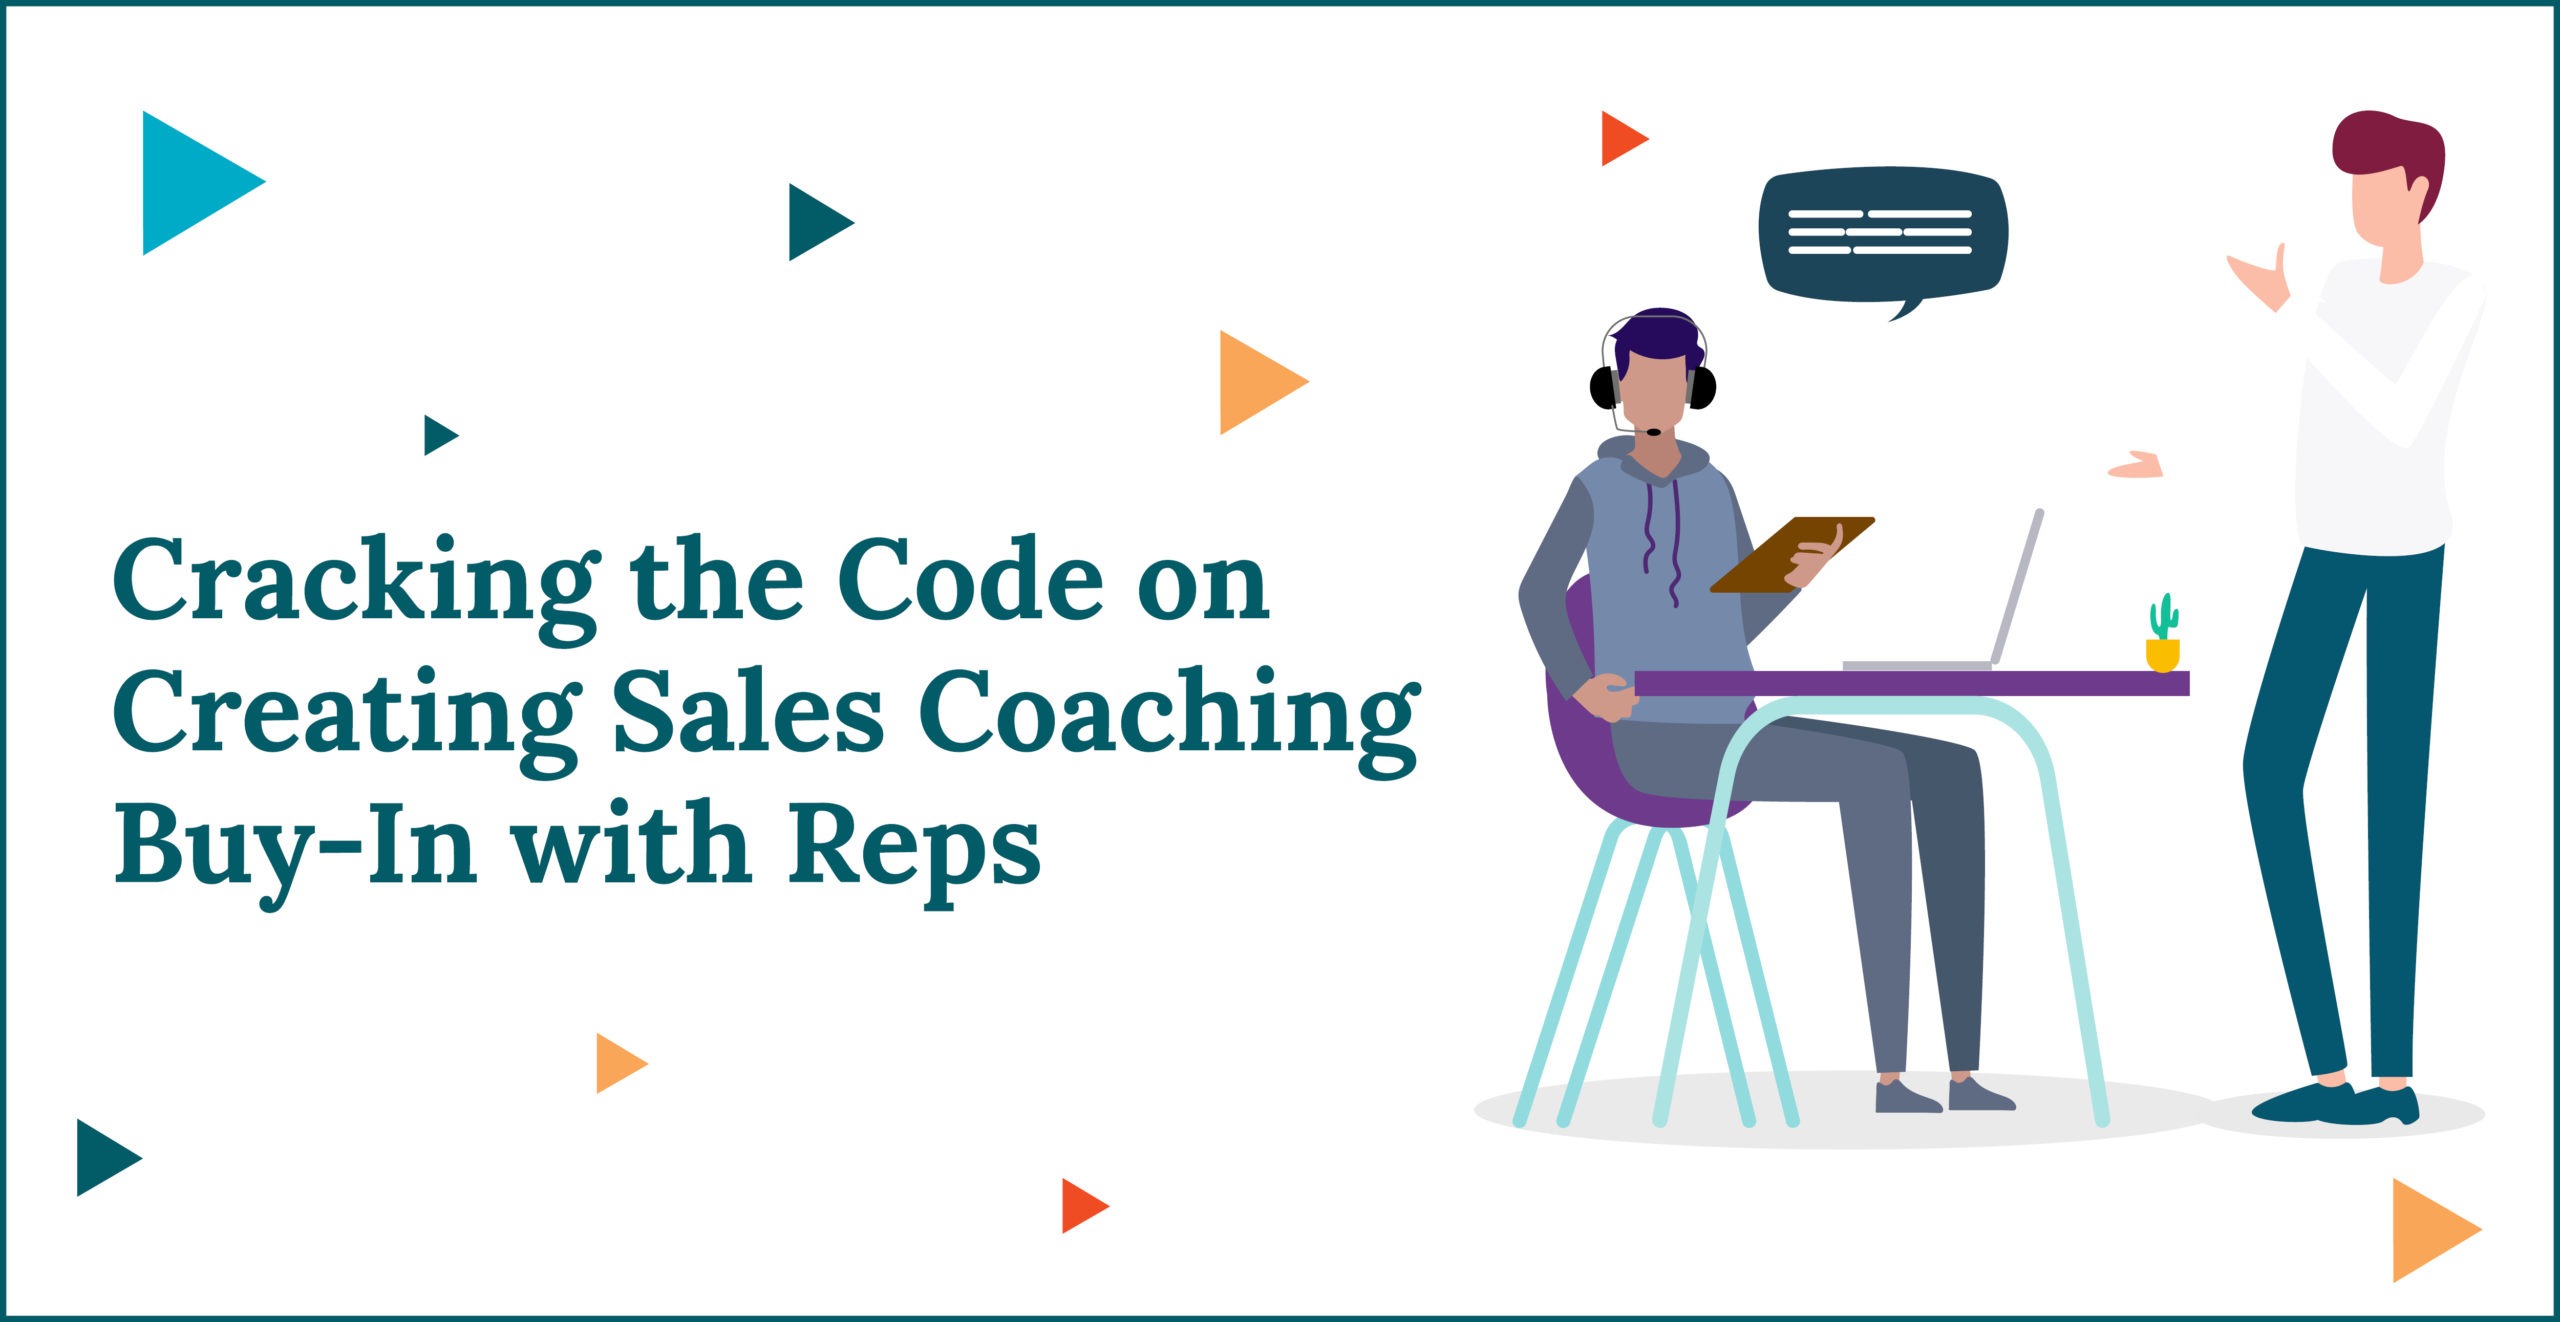 Cracking the Code on Creating Sales Coaching Buy-In with Reps